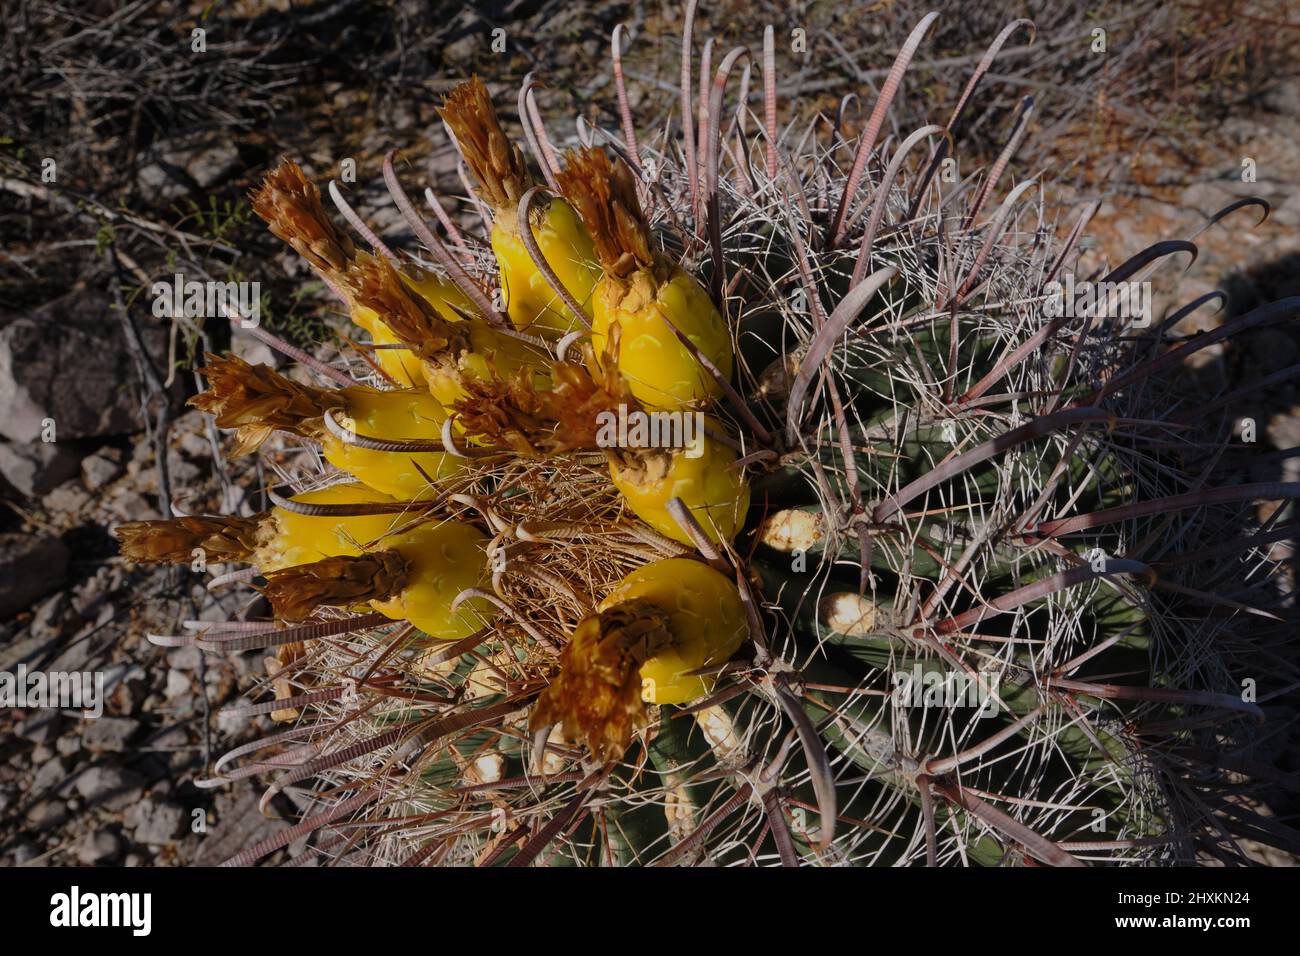 Close-up view of bright, succulent yellow blossoms on California Barrel Cactus in Tucson Mountain Park, Arizona Stock Photo